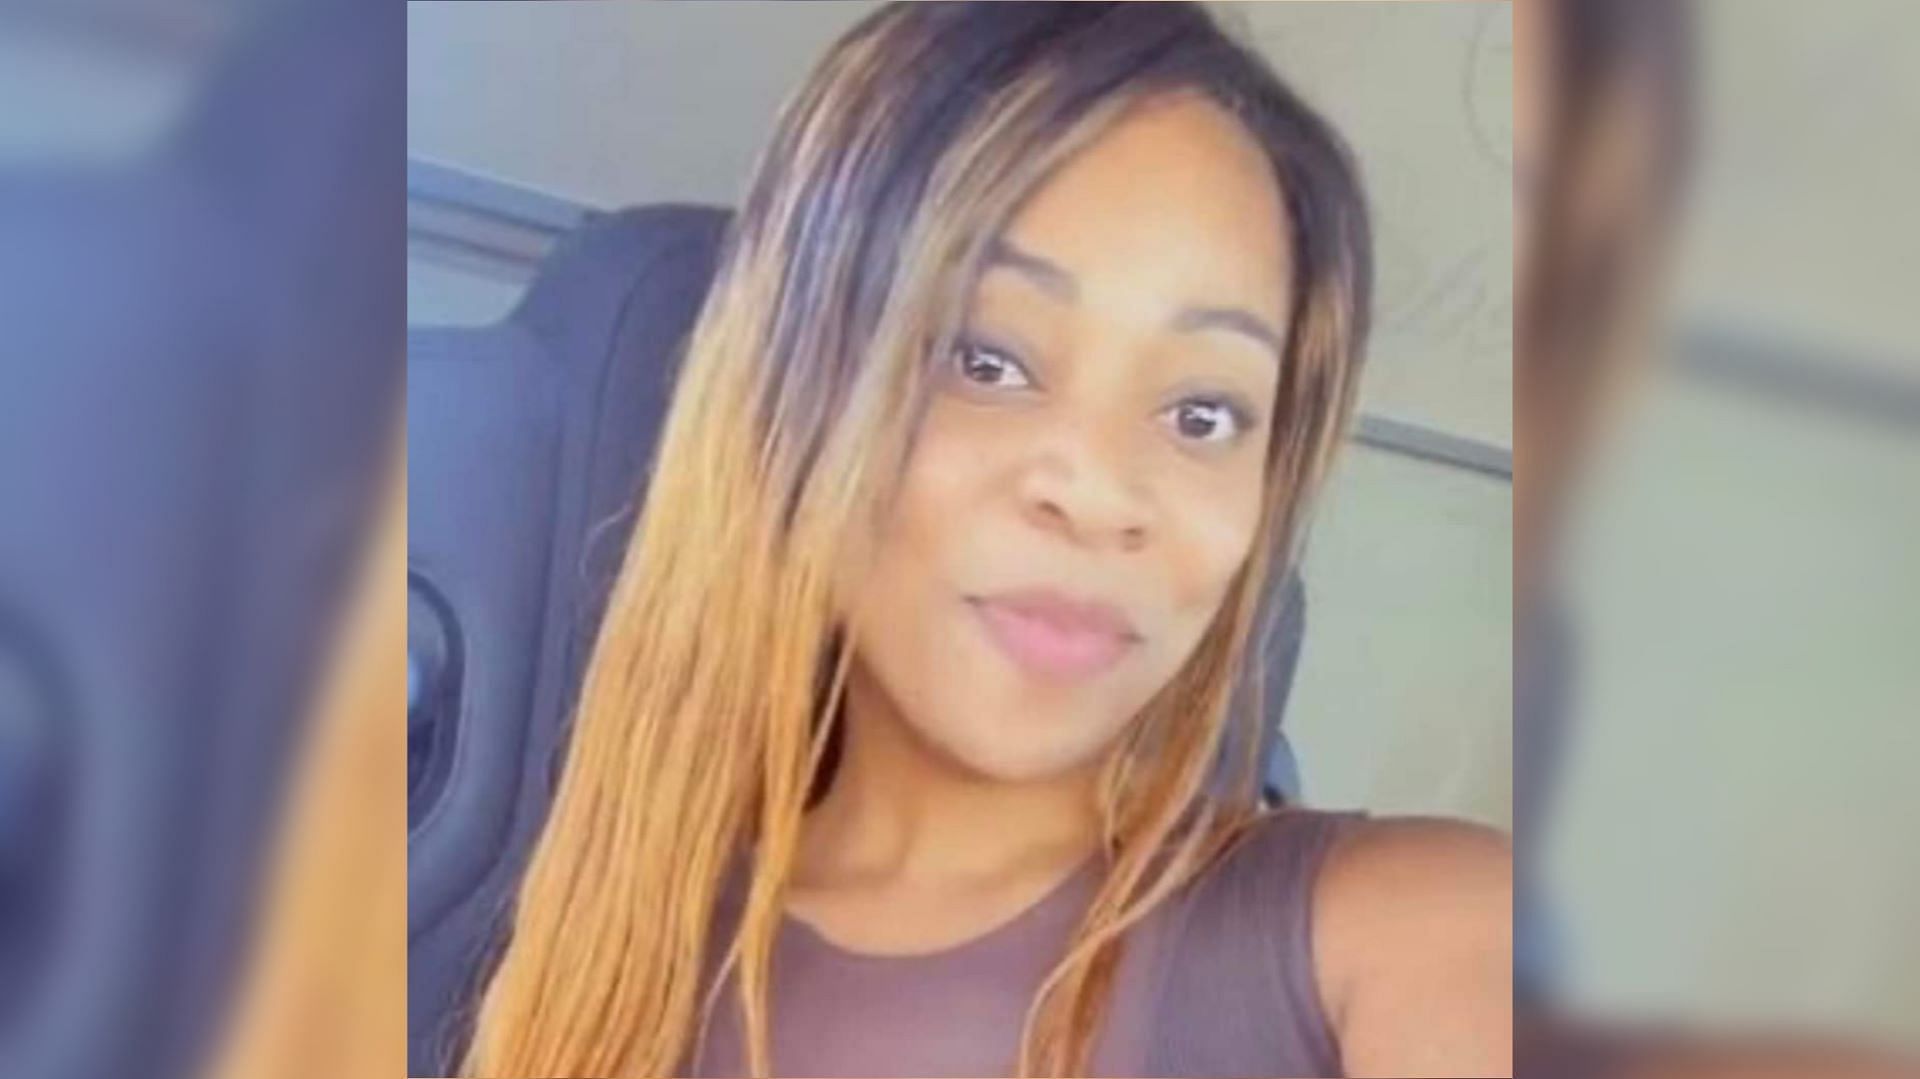 Texas woman arrested in Dubai for screaming: Who is Tierra Allen and what was her fault?